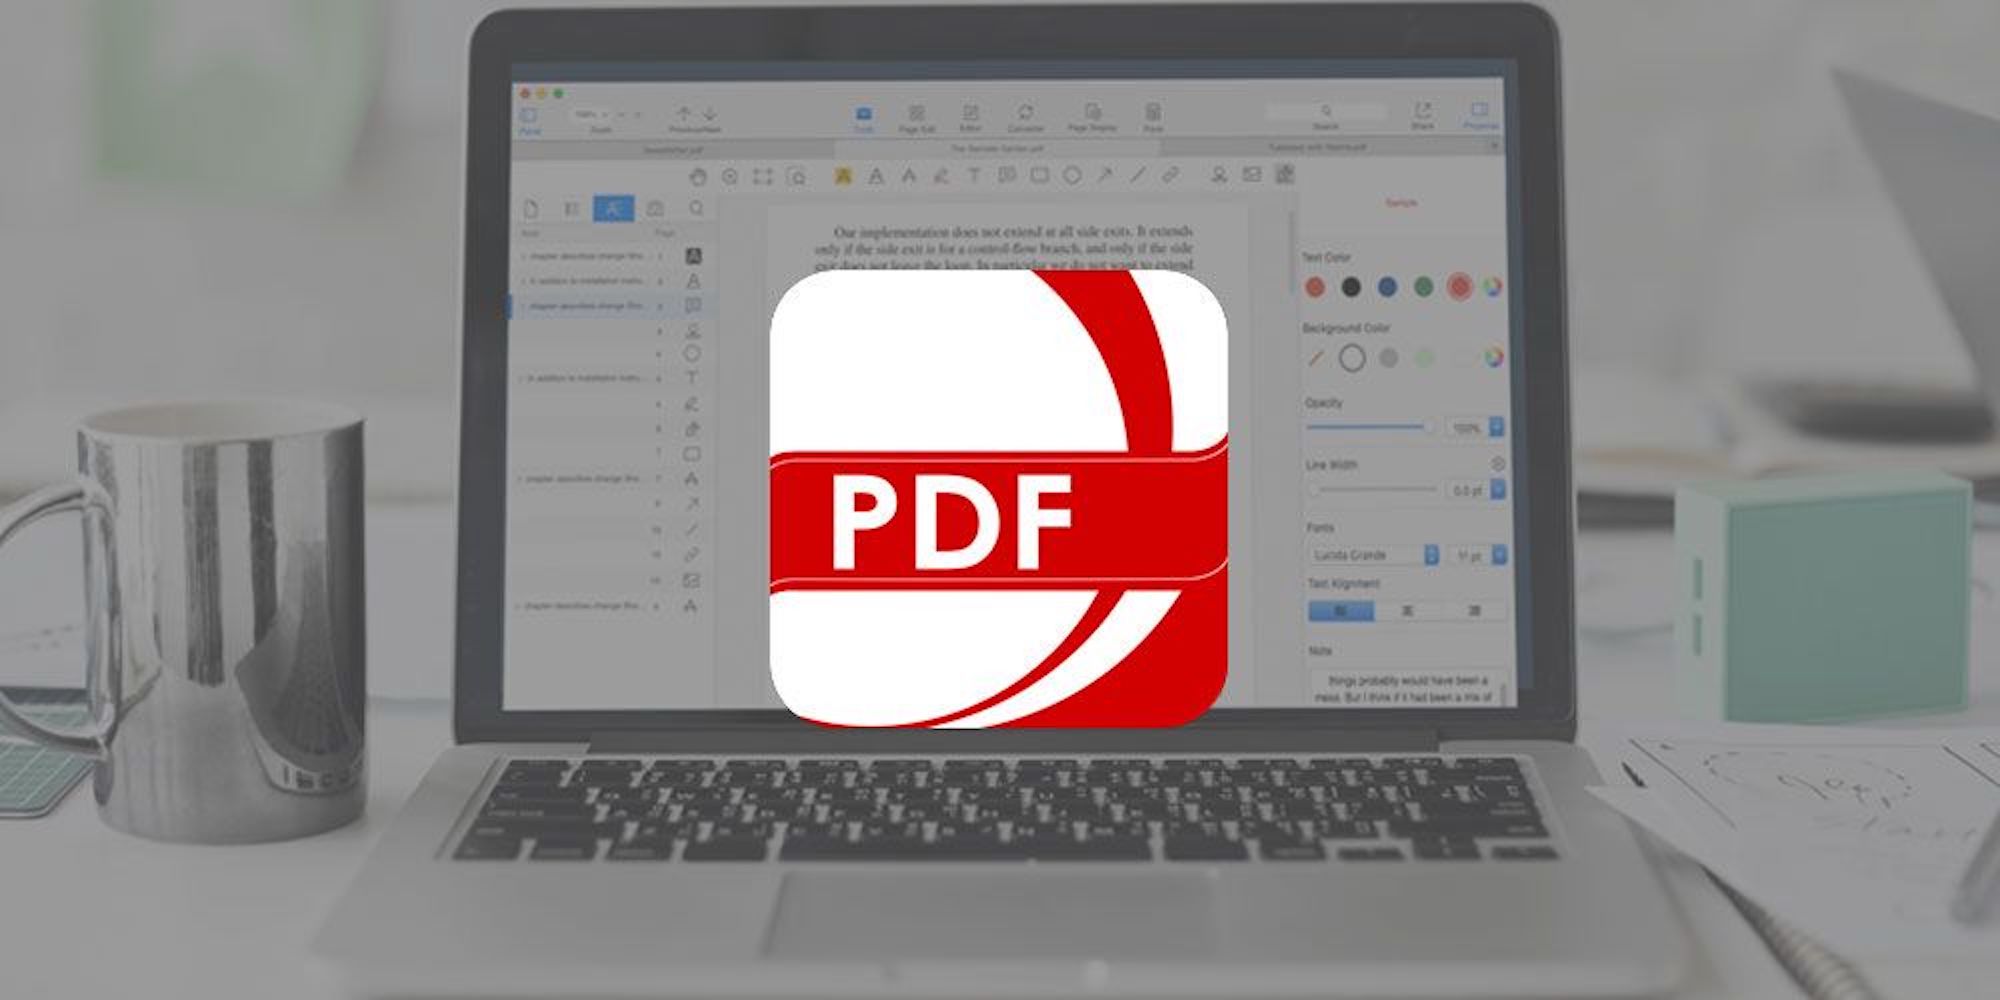 Make PDFs easy to read and edit with one simple tool.